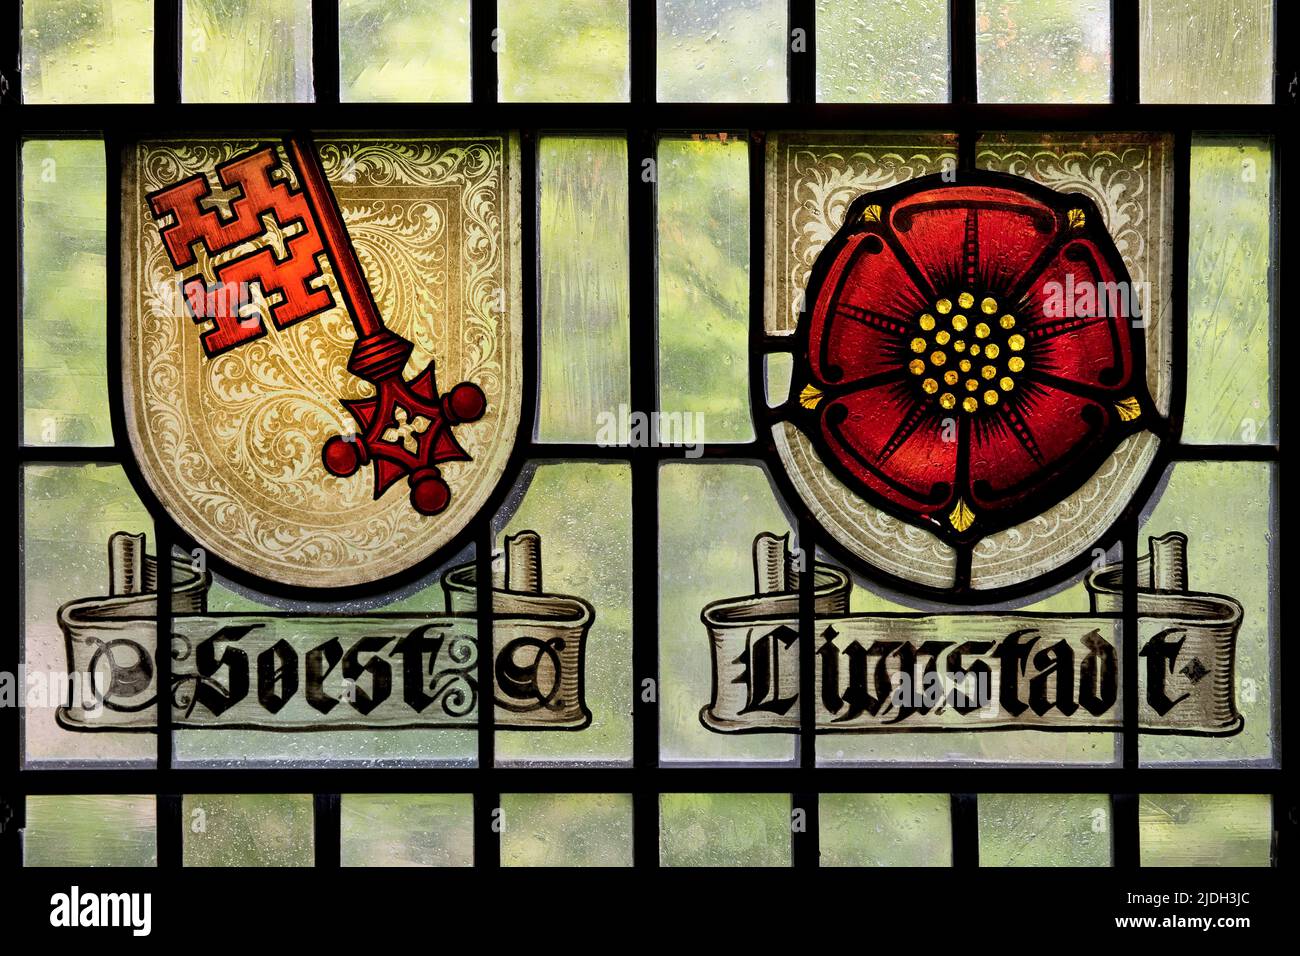 historic coat of arms glass panes of Soest and Lippstadt, Germany, North Rhine-Westphalia Stock Photo